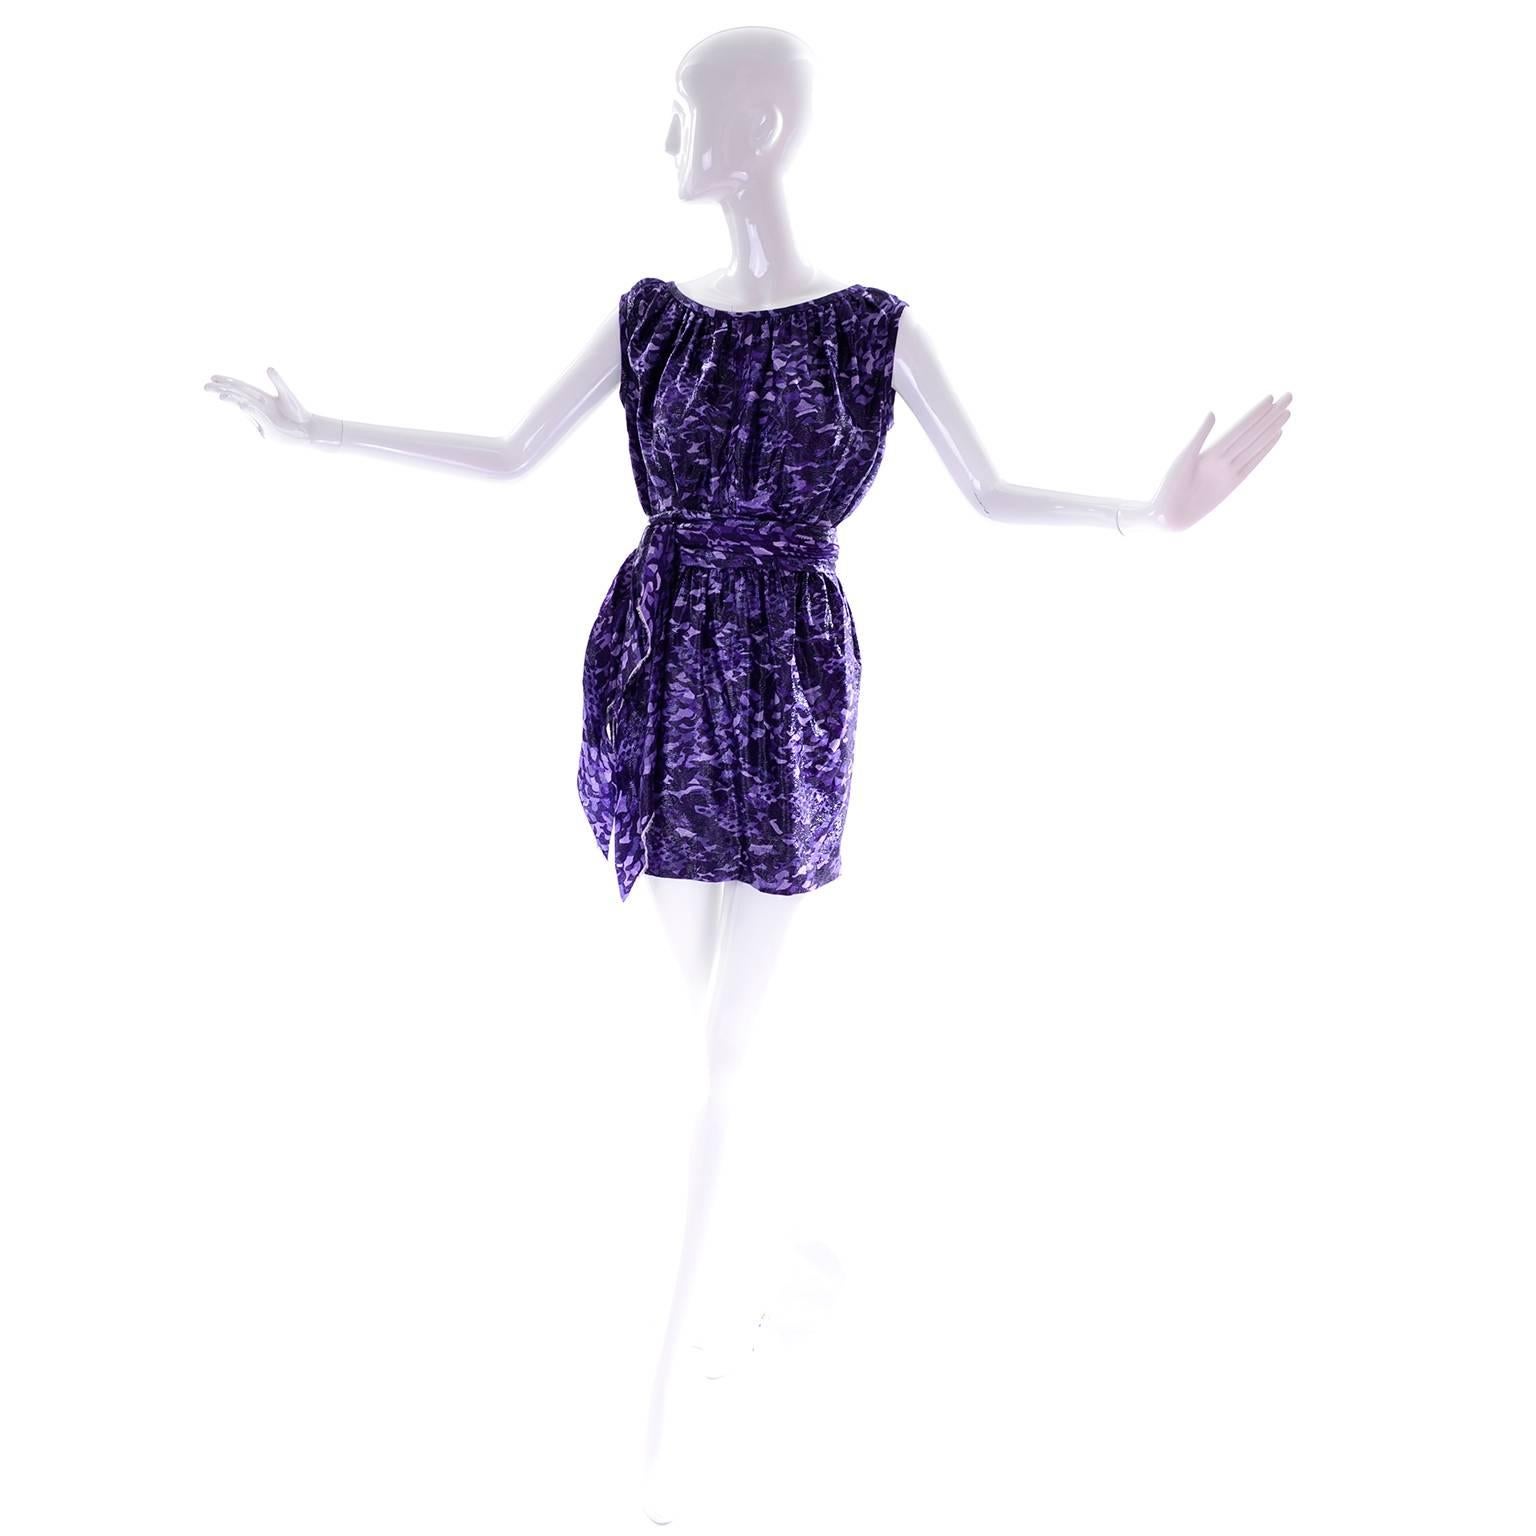 This is a fabulous Marc Jacobs  purple and black metallic abstract animal print mini dress. This sleeveless dress has a fabric sash that ties over an elastic waist. This dress is fully lined and we estimate it to fit a modern day size 4/6.  This fun